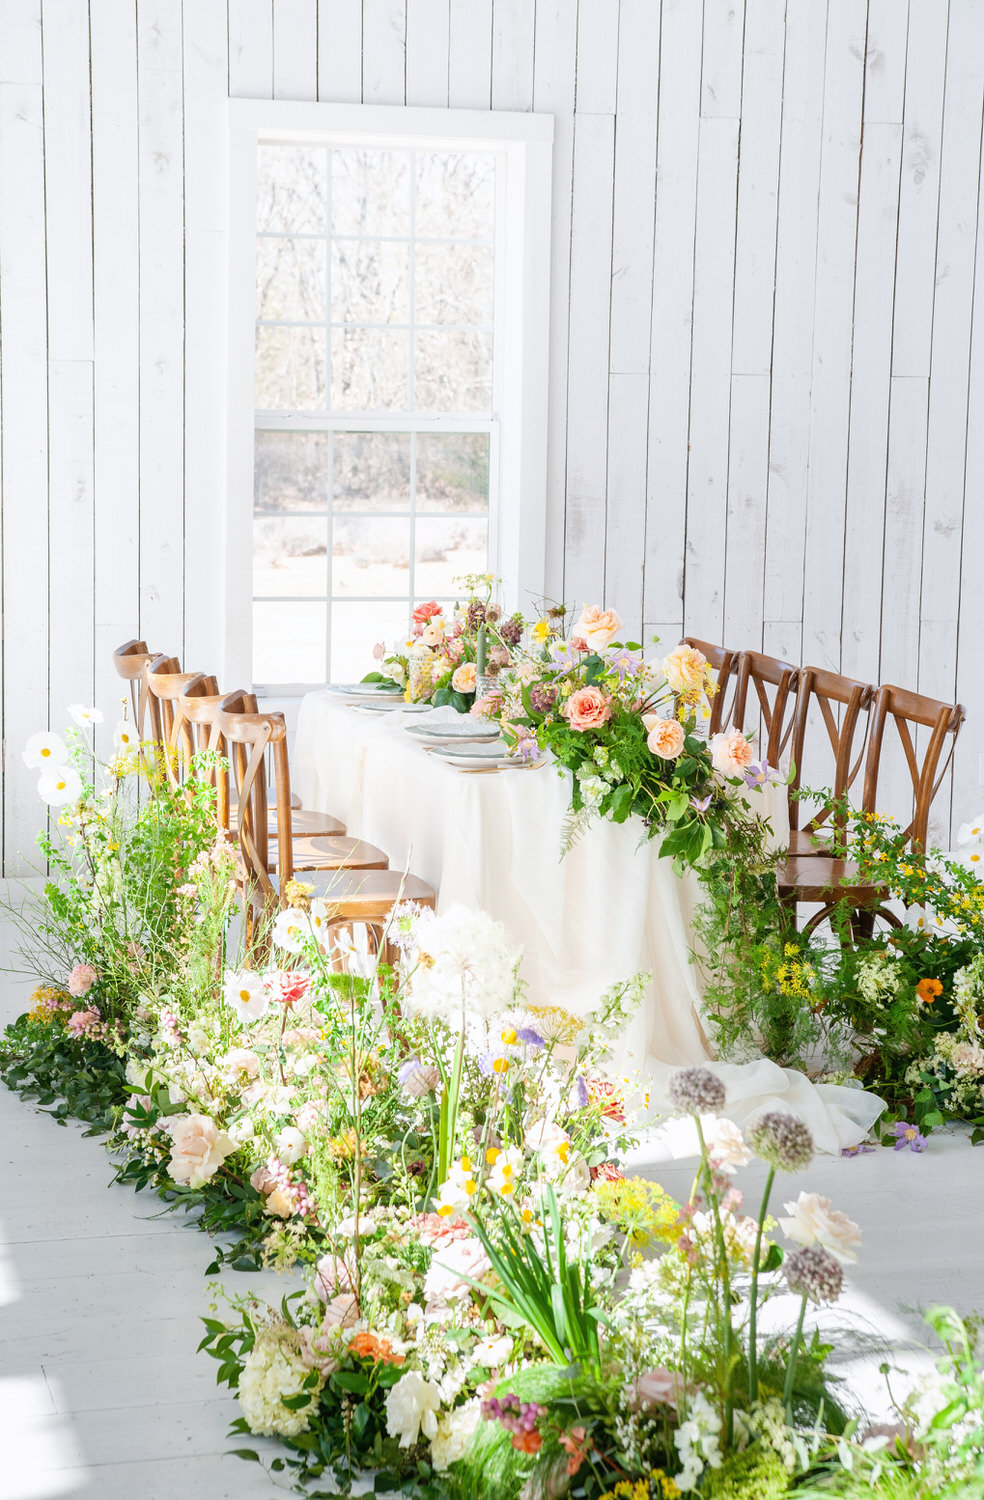 rustic wedding reception table for a couple's spring wedding at the White Sparrow in Quinlan Texas